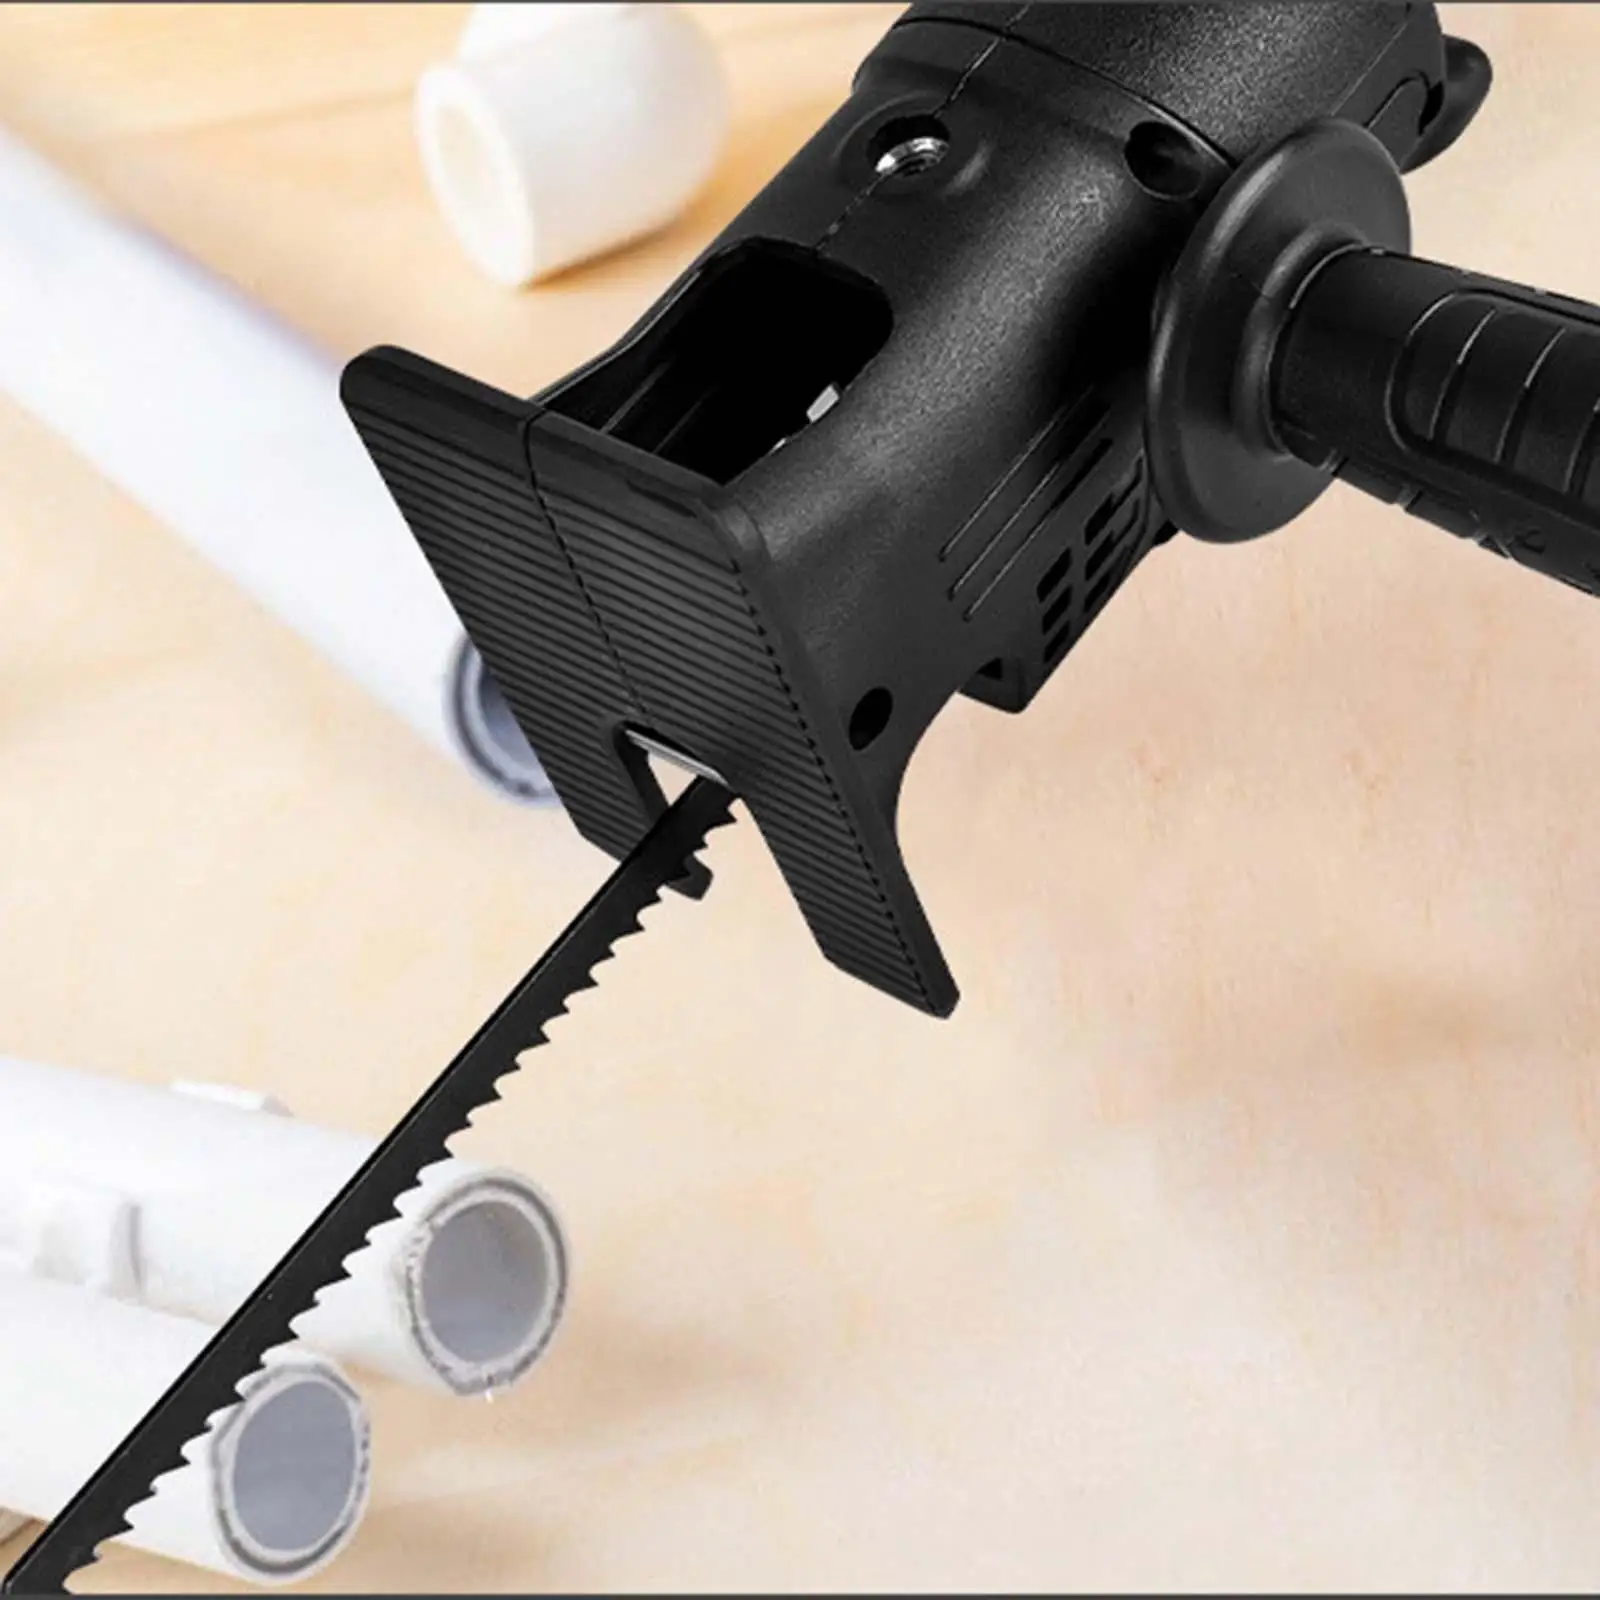 Reciprocating Saw Adapter with 3 Saws Jig Saw Electric Drill Tool Attachment Woodworking PVC Household Metal